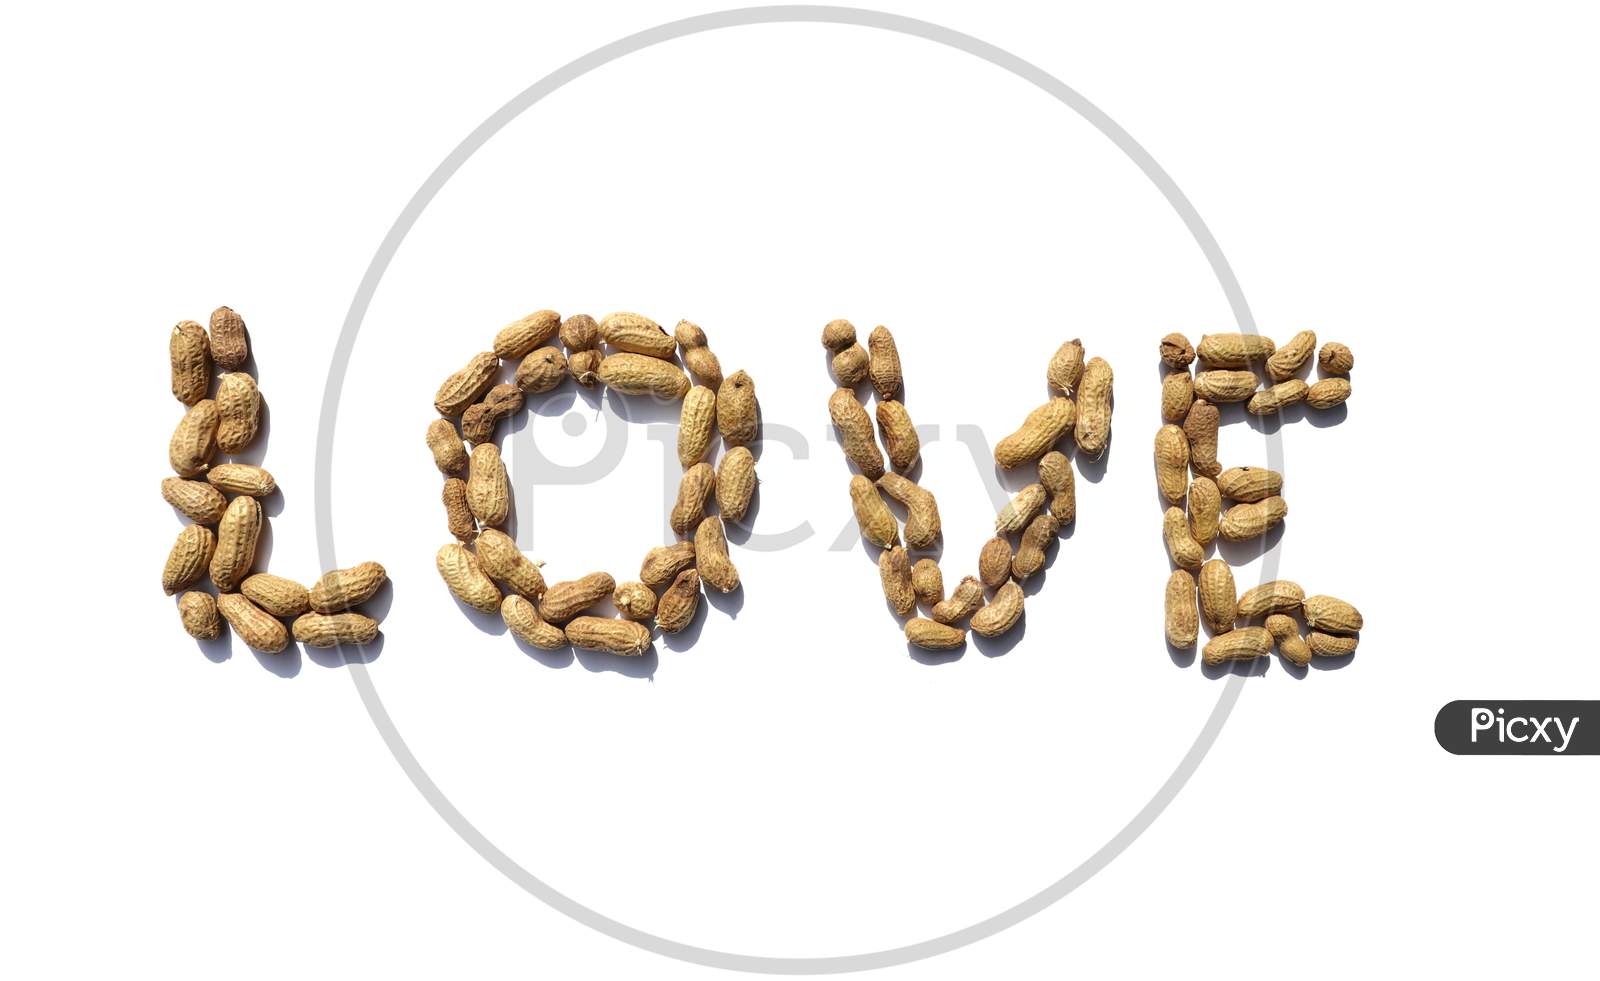 Love Word Written With Peanuts On White Background In Horizontal Orientation, Perfect For Wallpaper